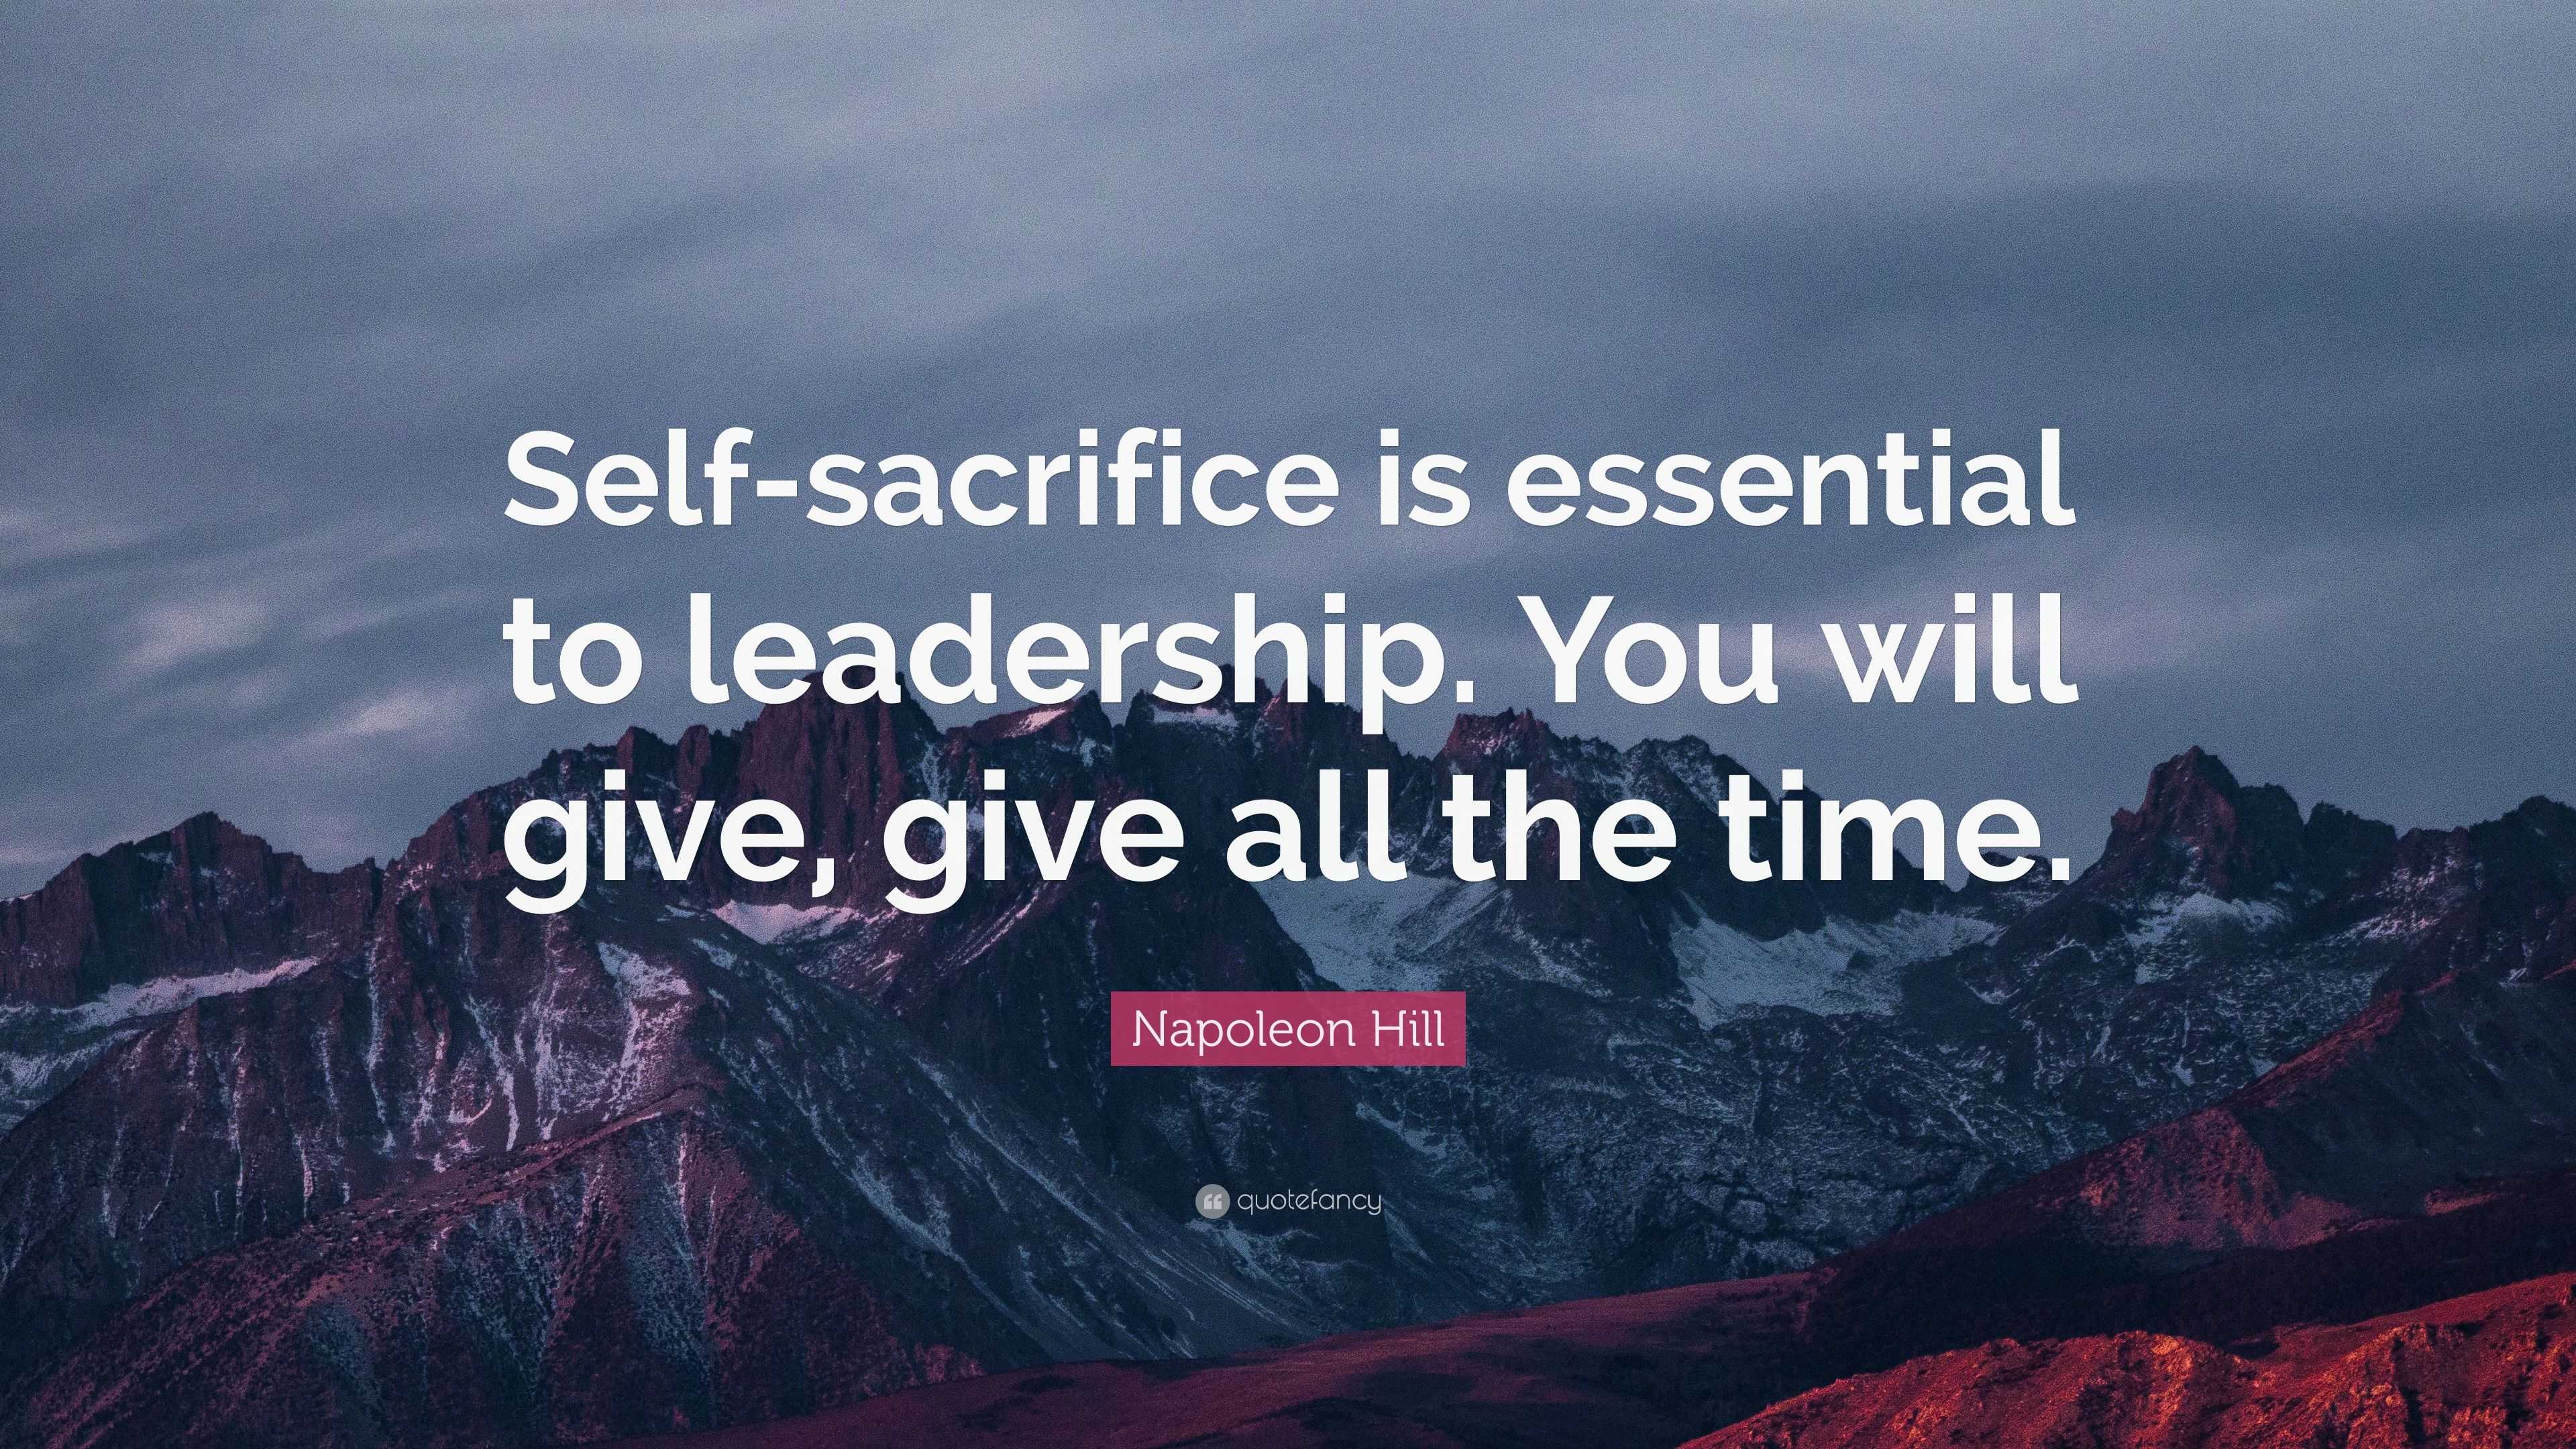 Napoleon Hill Quote: “Self-sacrifice is essential to leadership. You